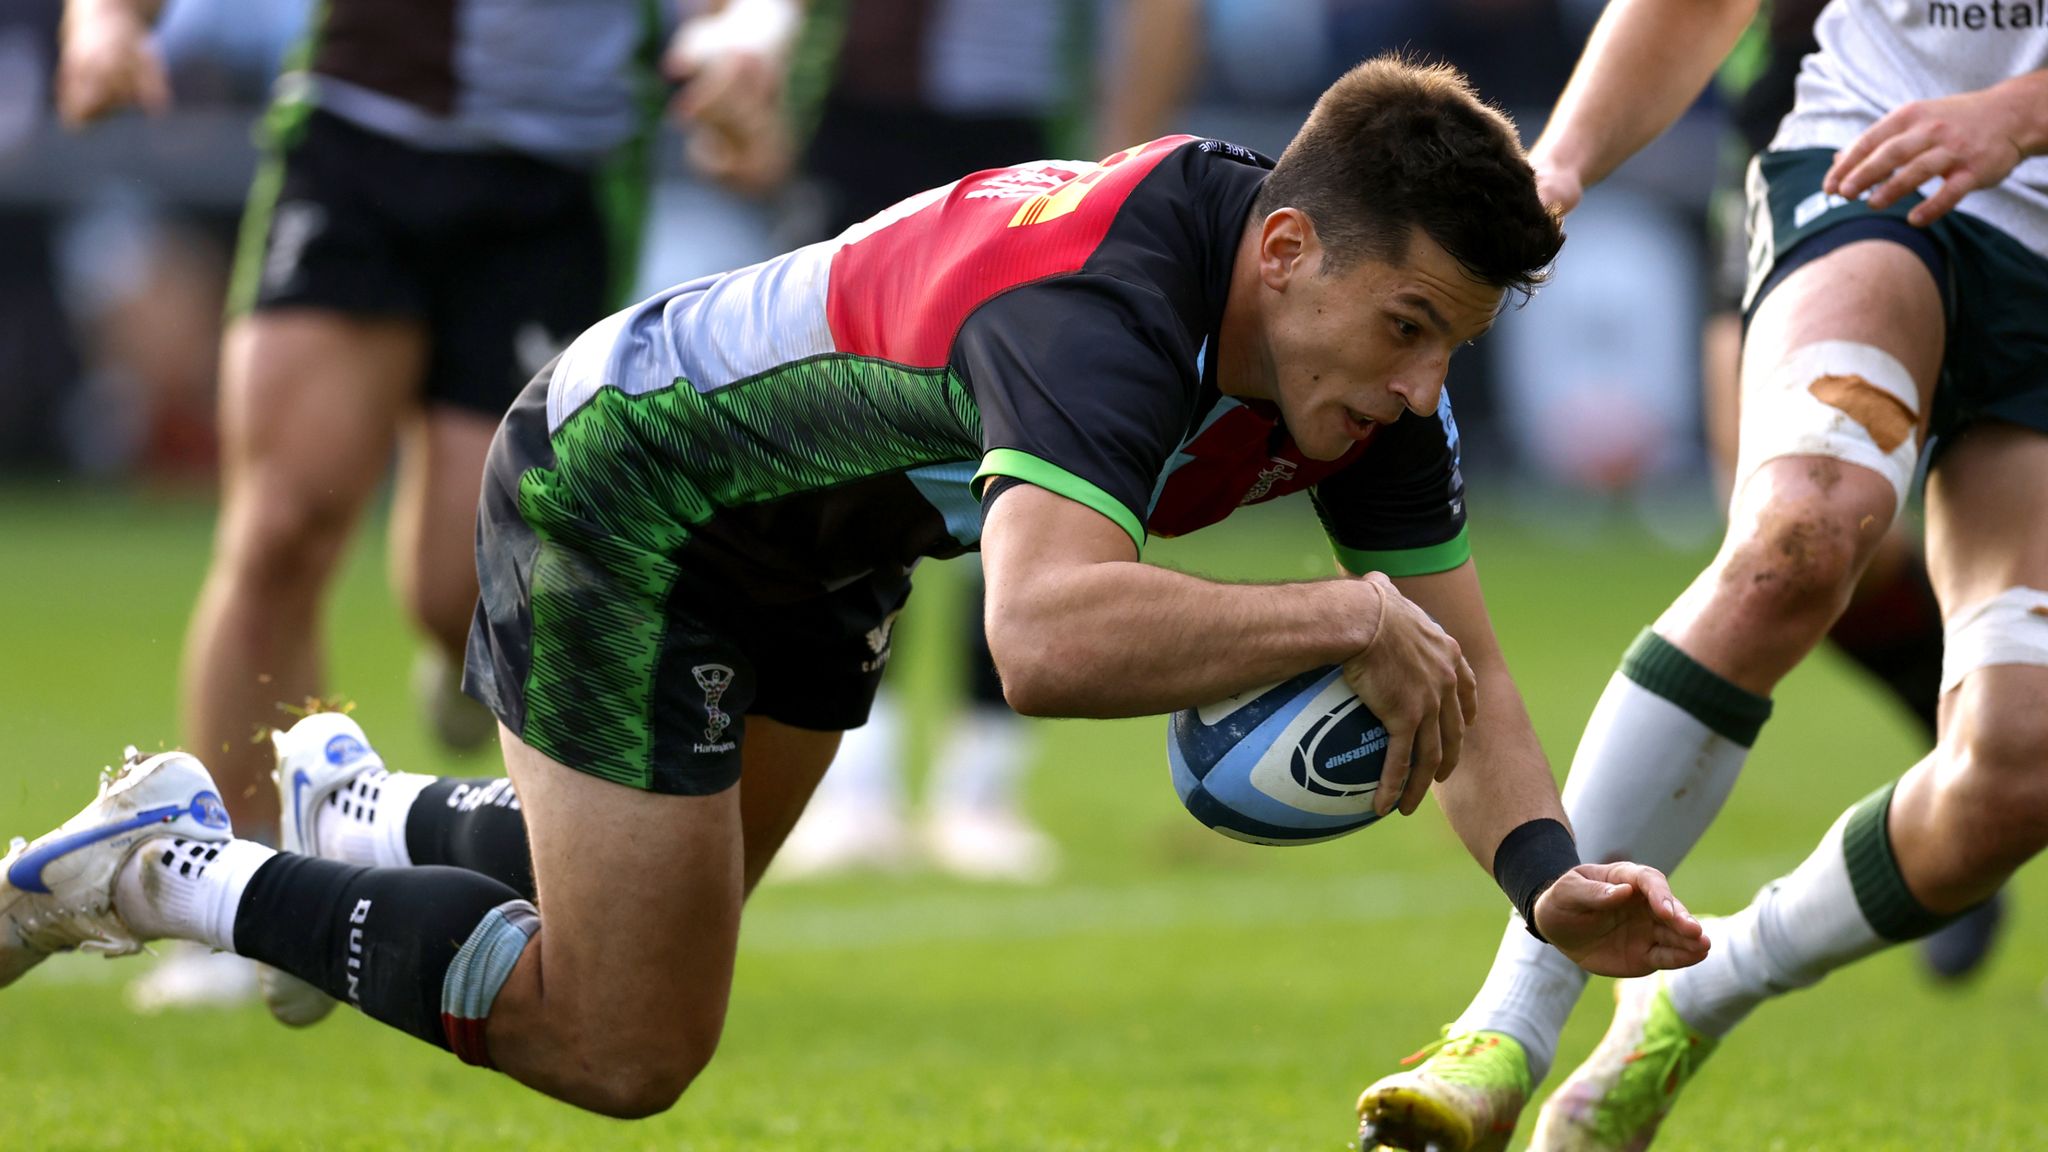 Gallagher Premiership Harlequins beat London Irish late; Northampton Saints too strong for Bristol Bears Rugby Union News Sky Sports